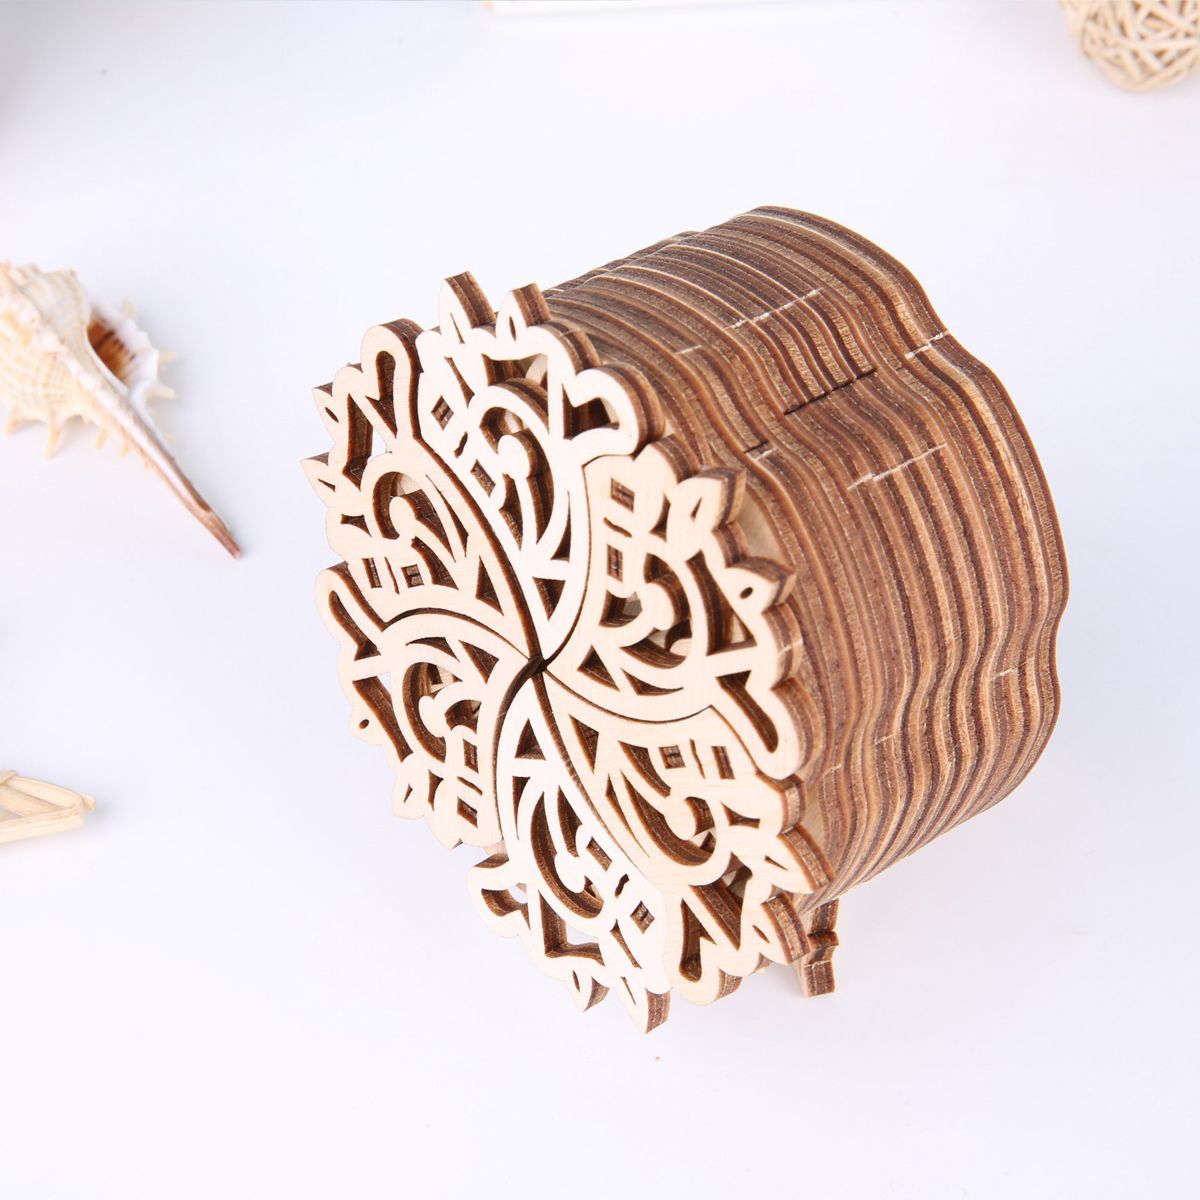 3D-Wooden-Music-Box-DIY-Mechanical-Model-Eight-Sound-Box-Assembling-Puzzle-Toy-1667696